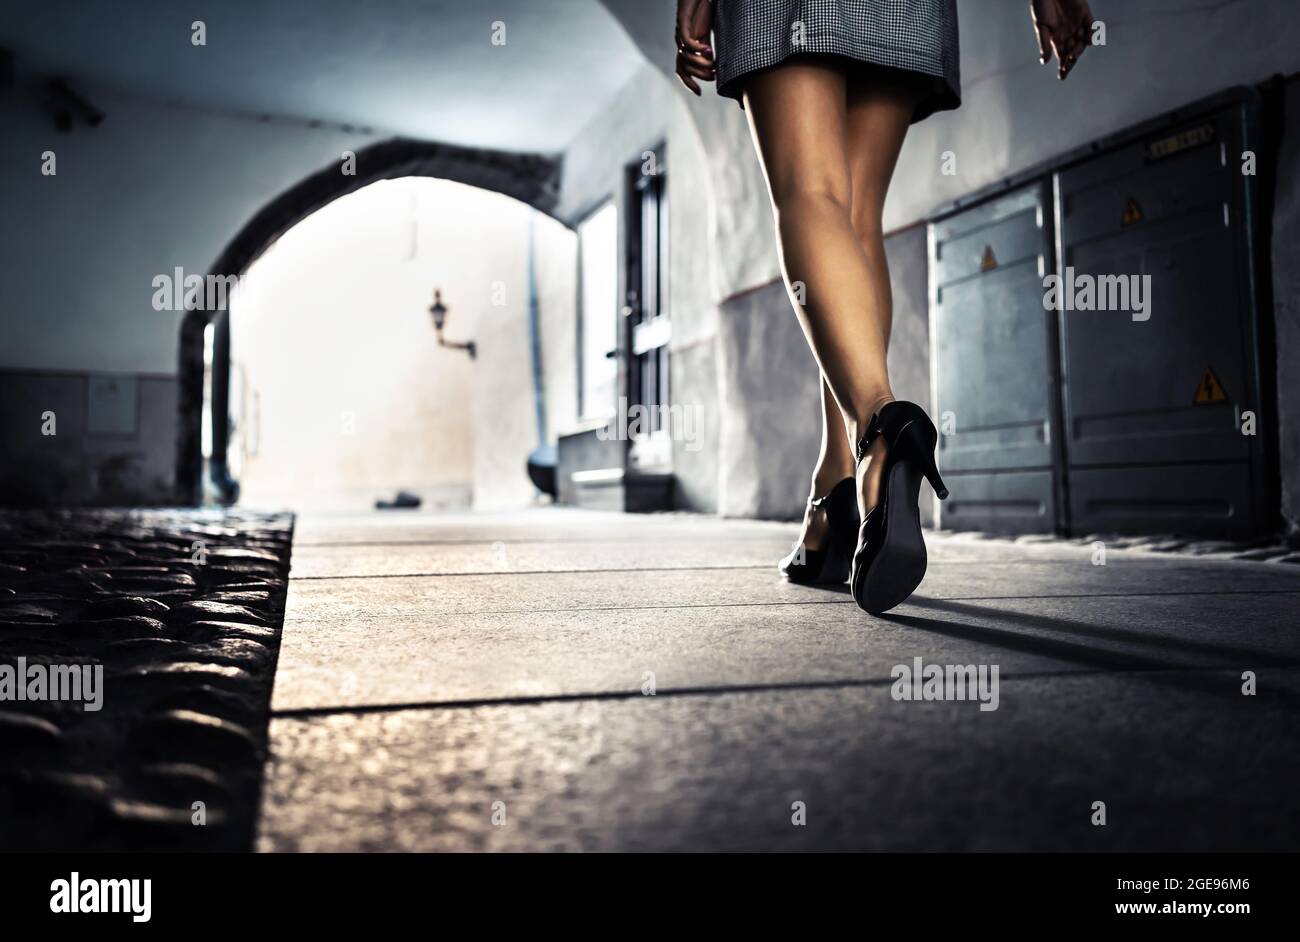 Woman in dark alley and city street at night alone. Lonely scared girl walking, afraid of sexual harassment or robber following. Scary dramatic tunnel. Stock Photo